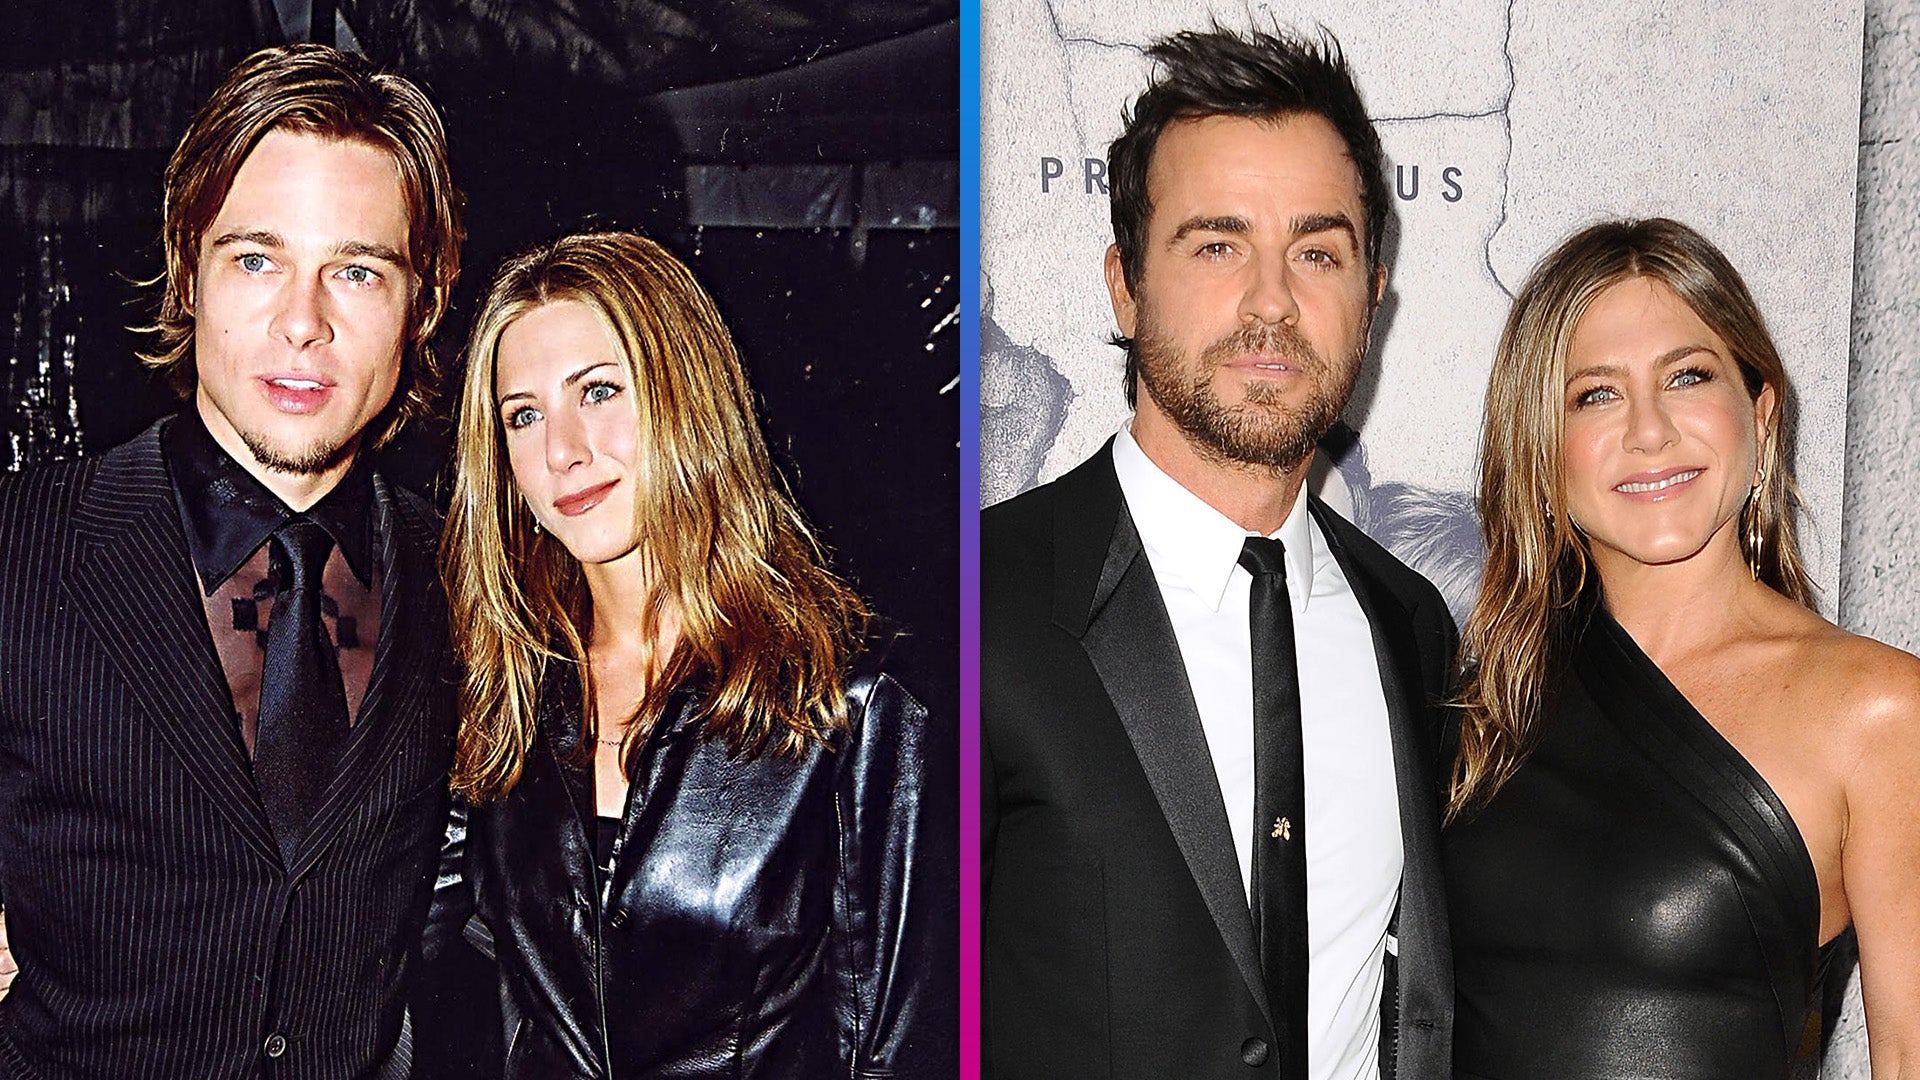 Jennifer Aniston's Road to Love: Her Time With Brad Pitt and Justin Theroux